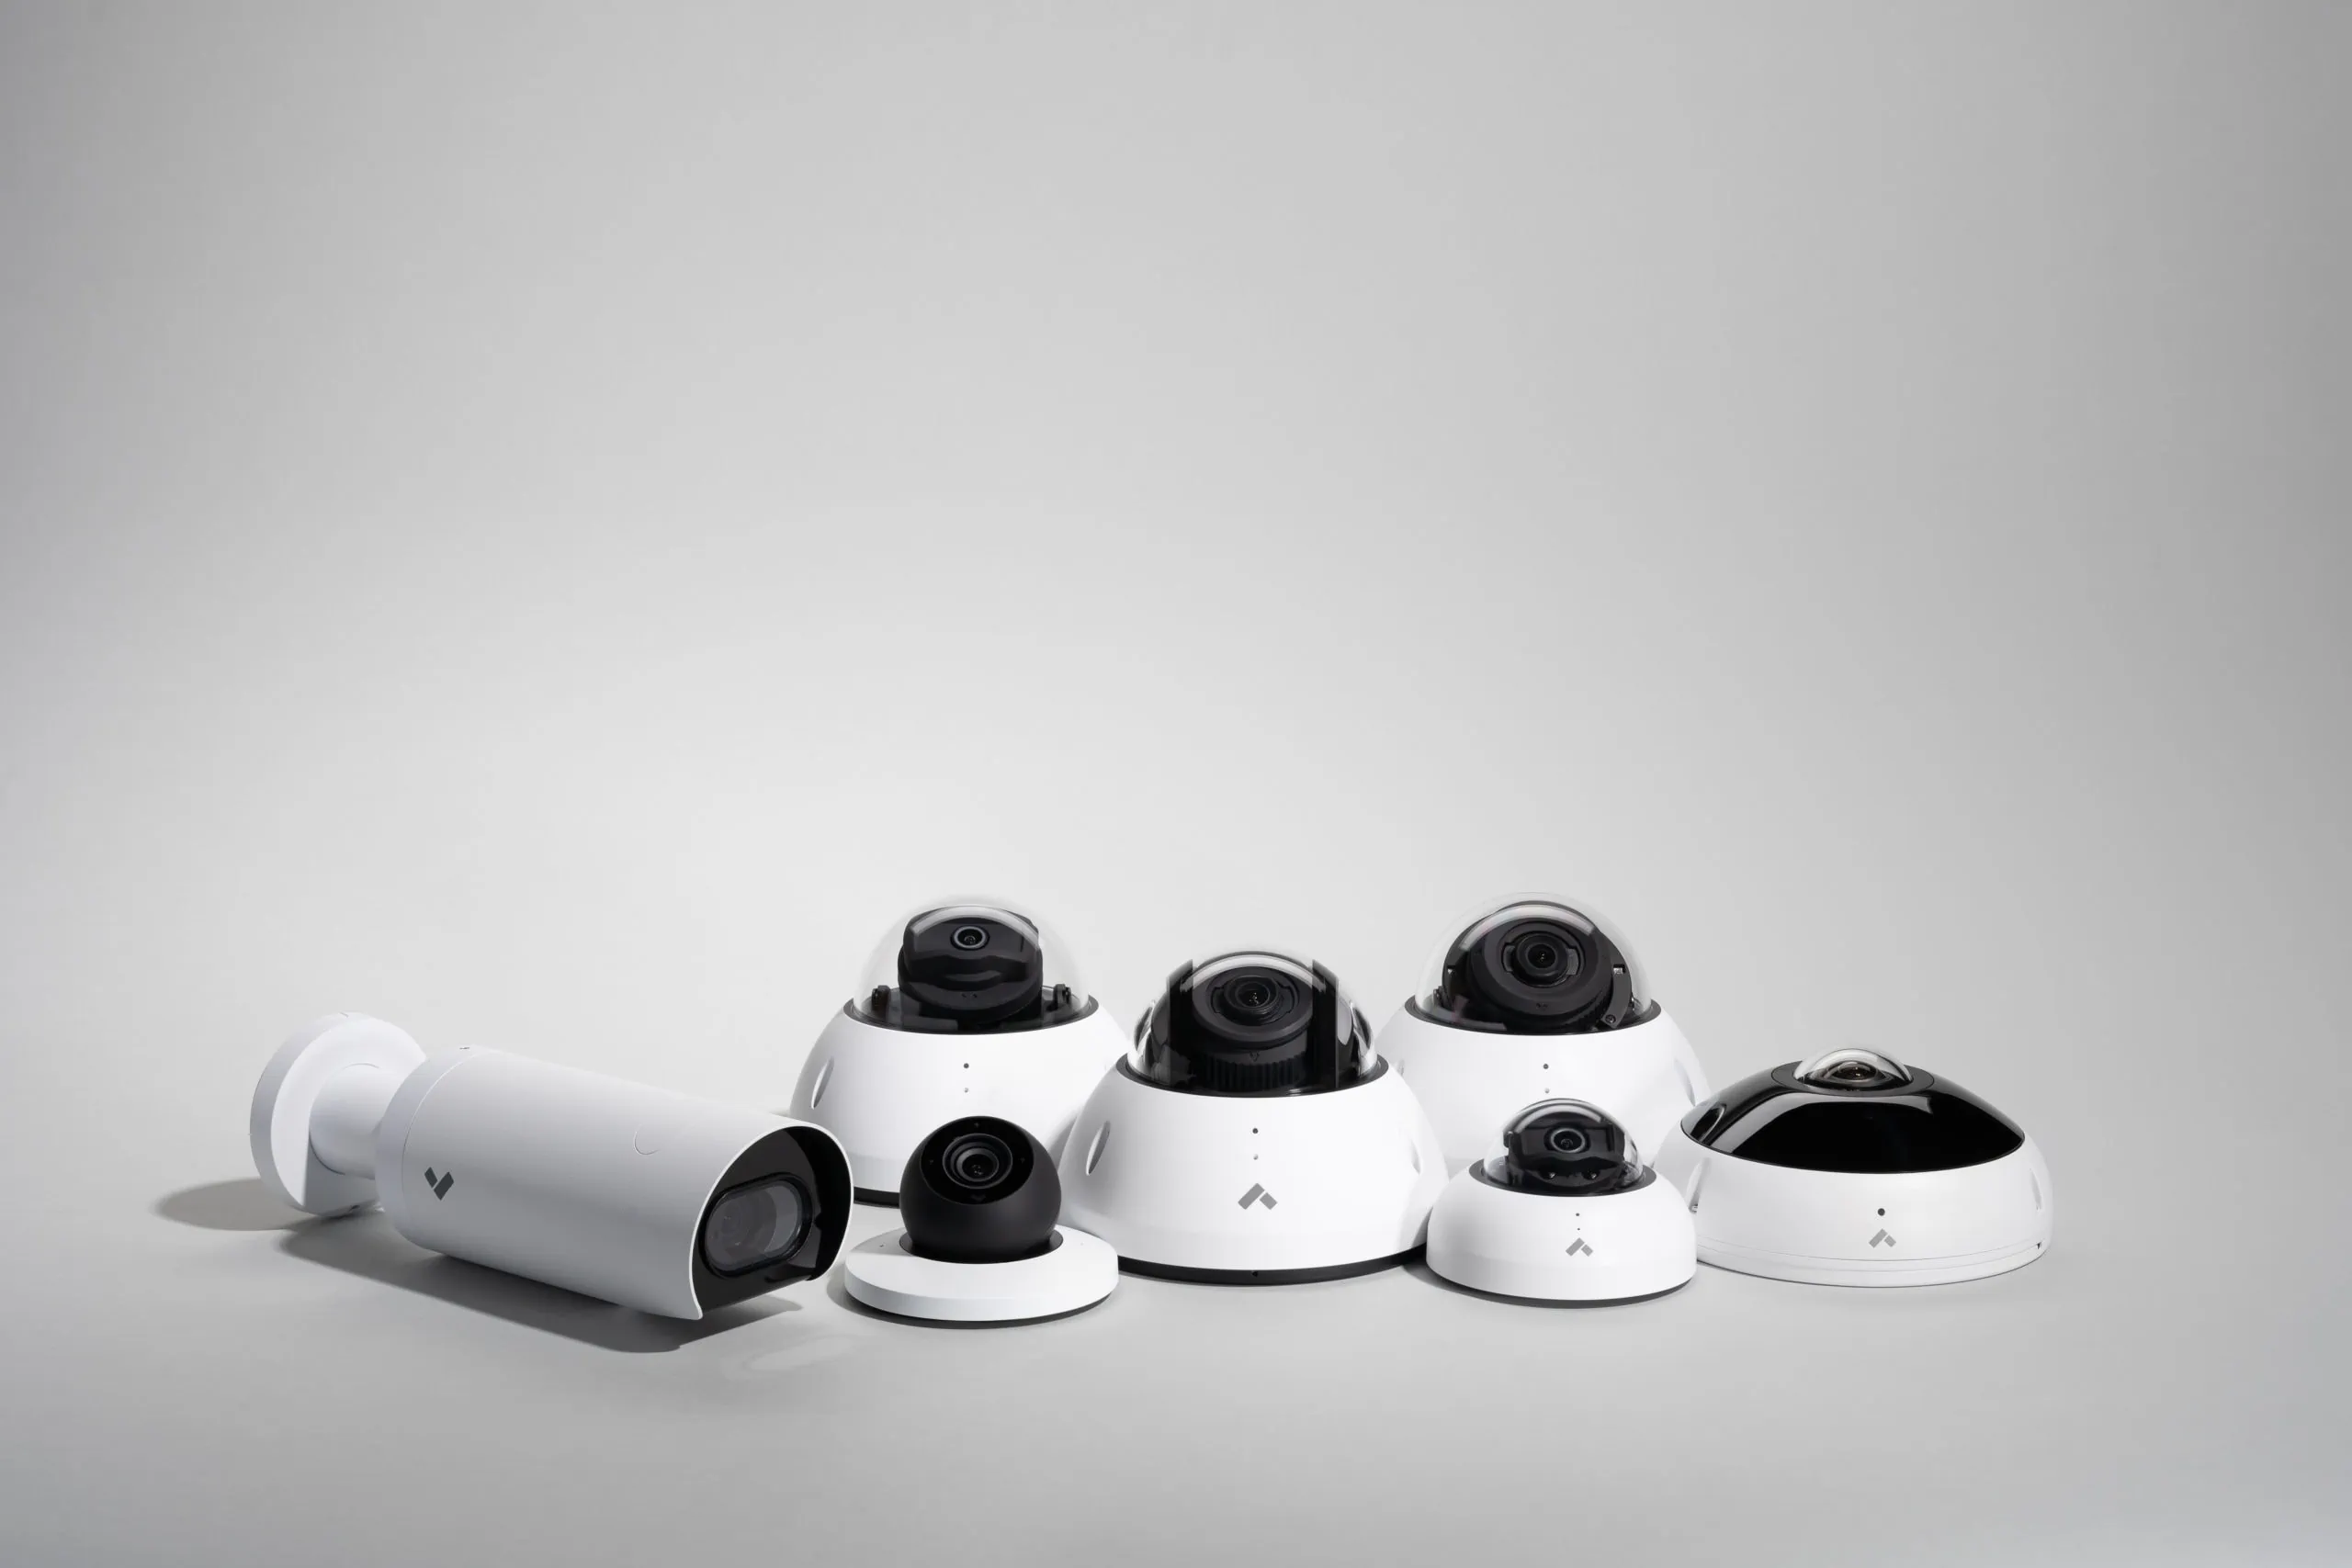 Verkada offers highest resolution security cameras for your property's safety